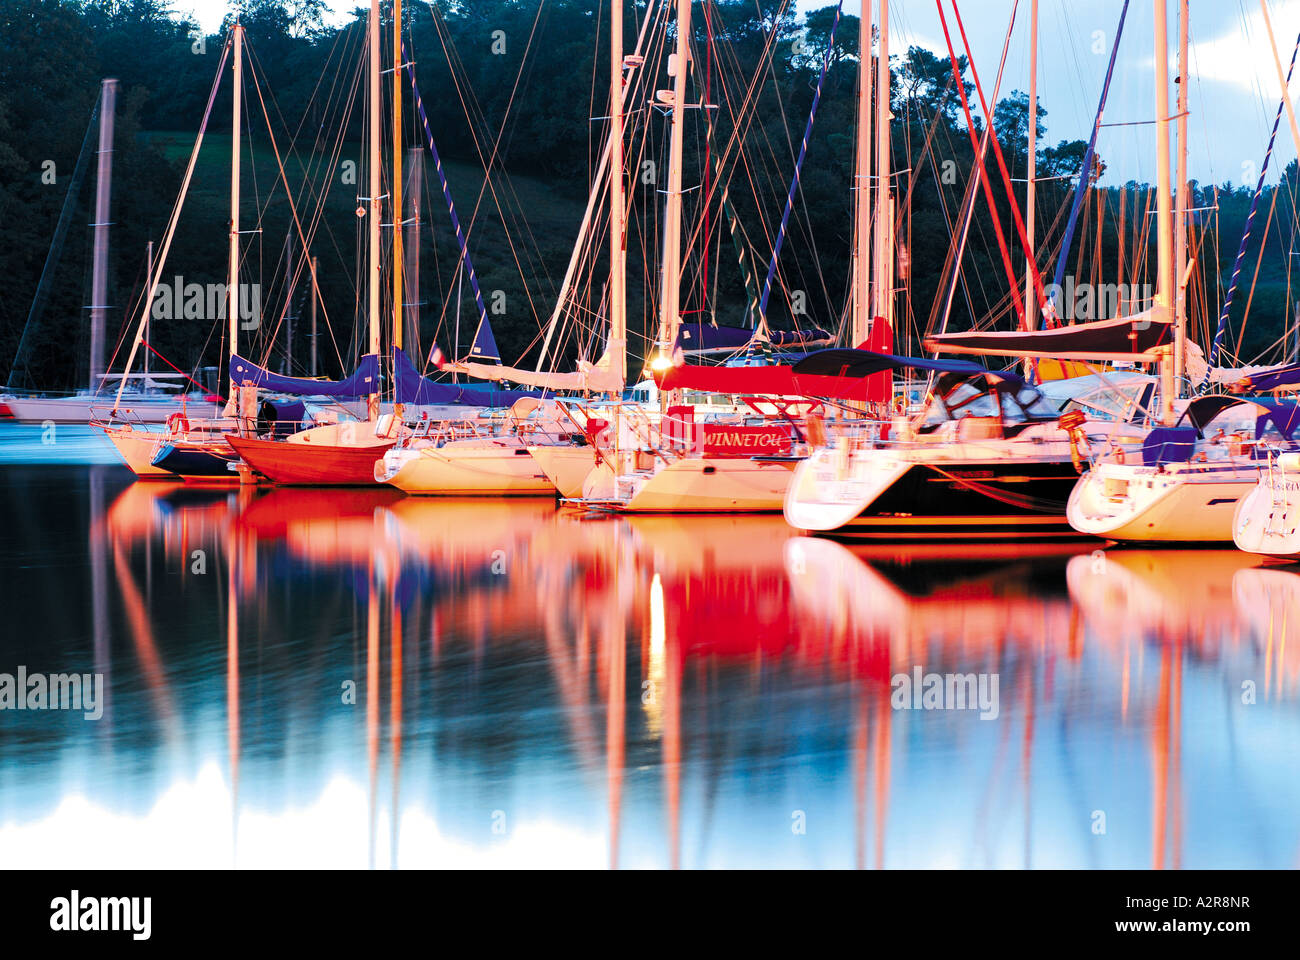 Yachts reflecting in the water with evening light, harbour of La Roche Bernard, Brittany, France Stock Photo